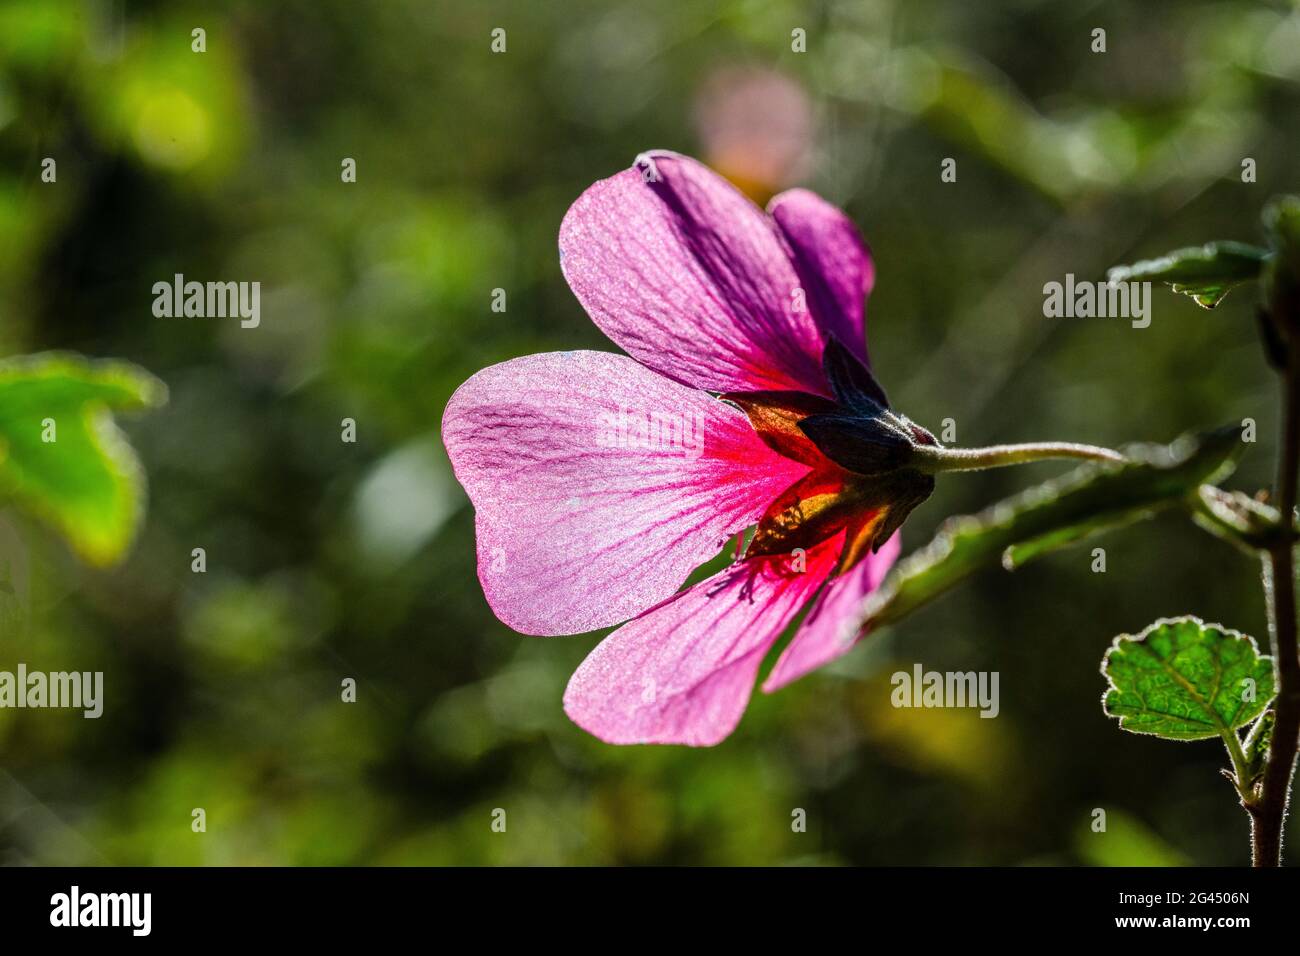 Close-up of pink flower and stem Stock Photo